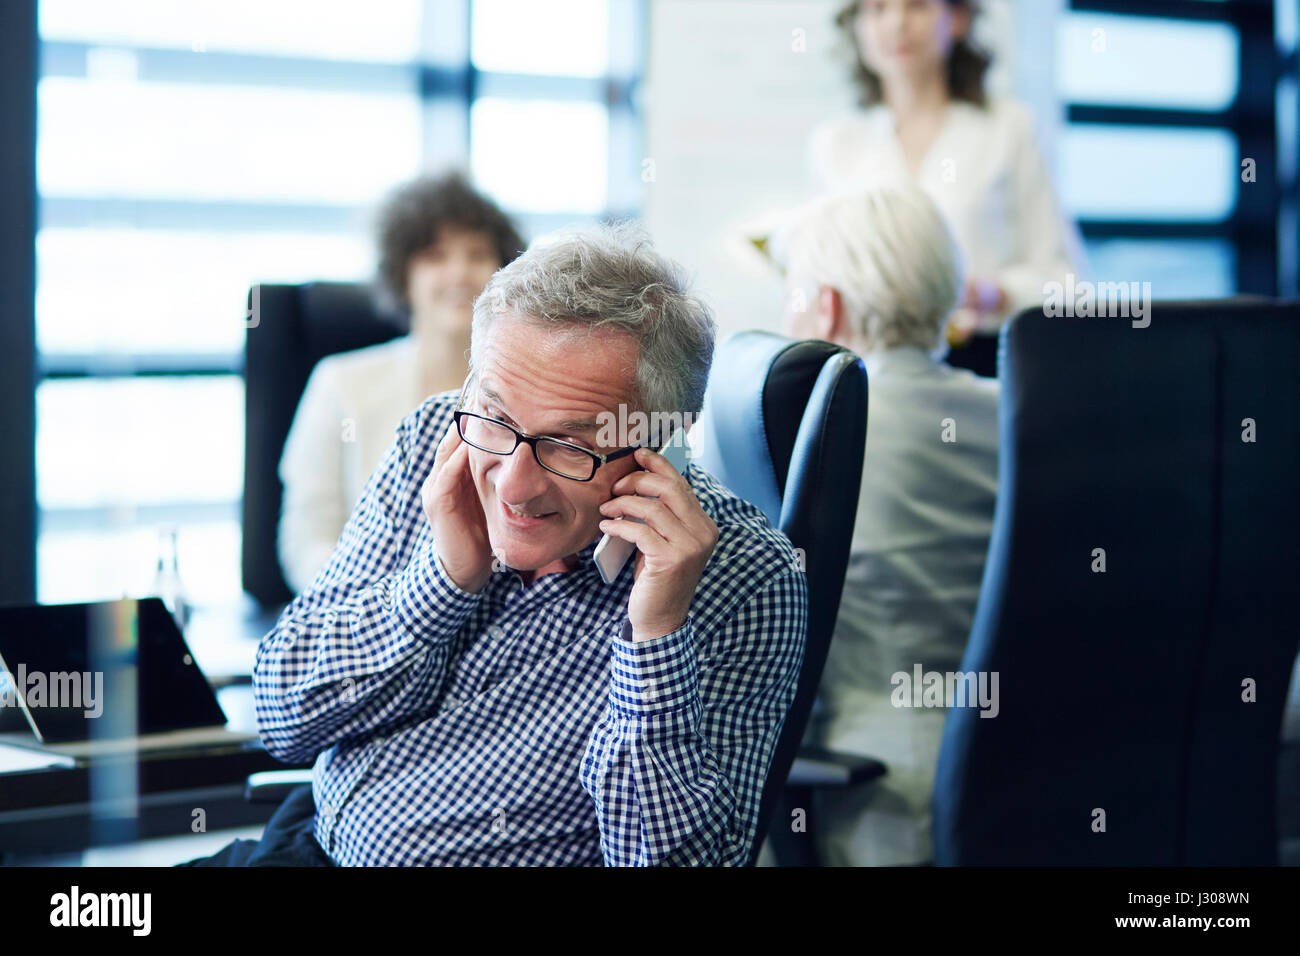 Emergency call on the business meeting Stock Photo